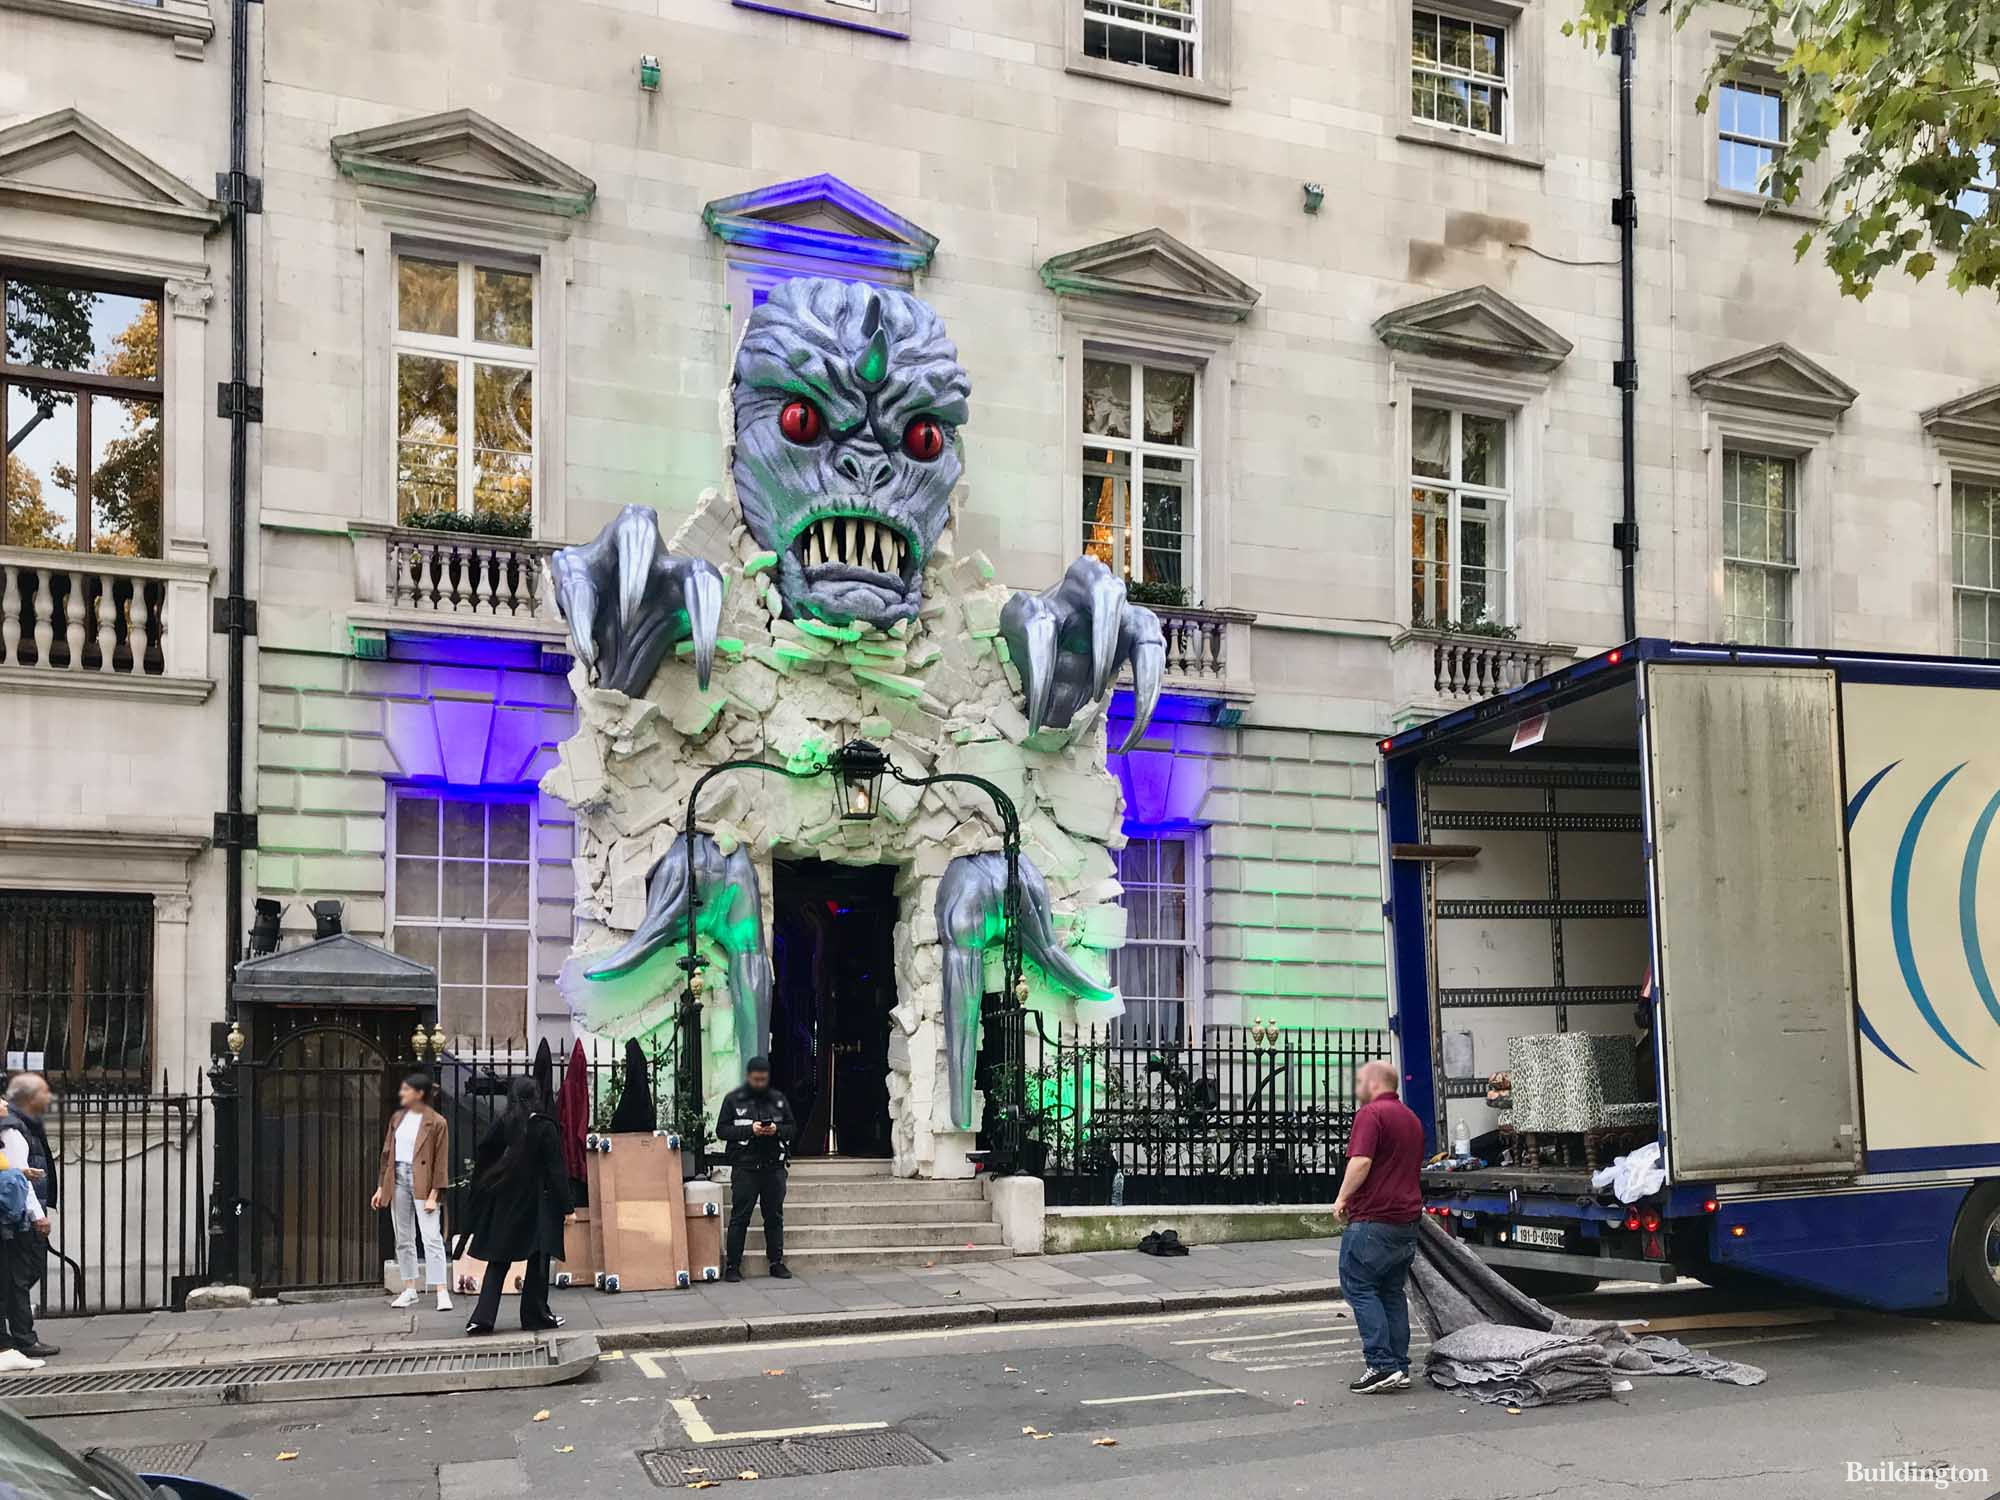 Annabel's building at 46 Berkeley Square has been decorated for Halloween 2022 parties.